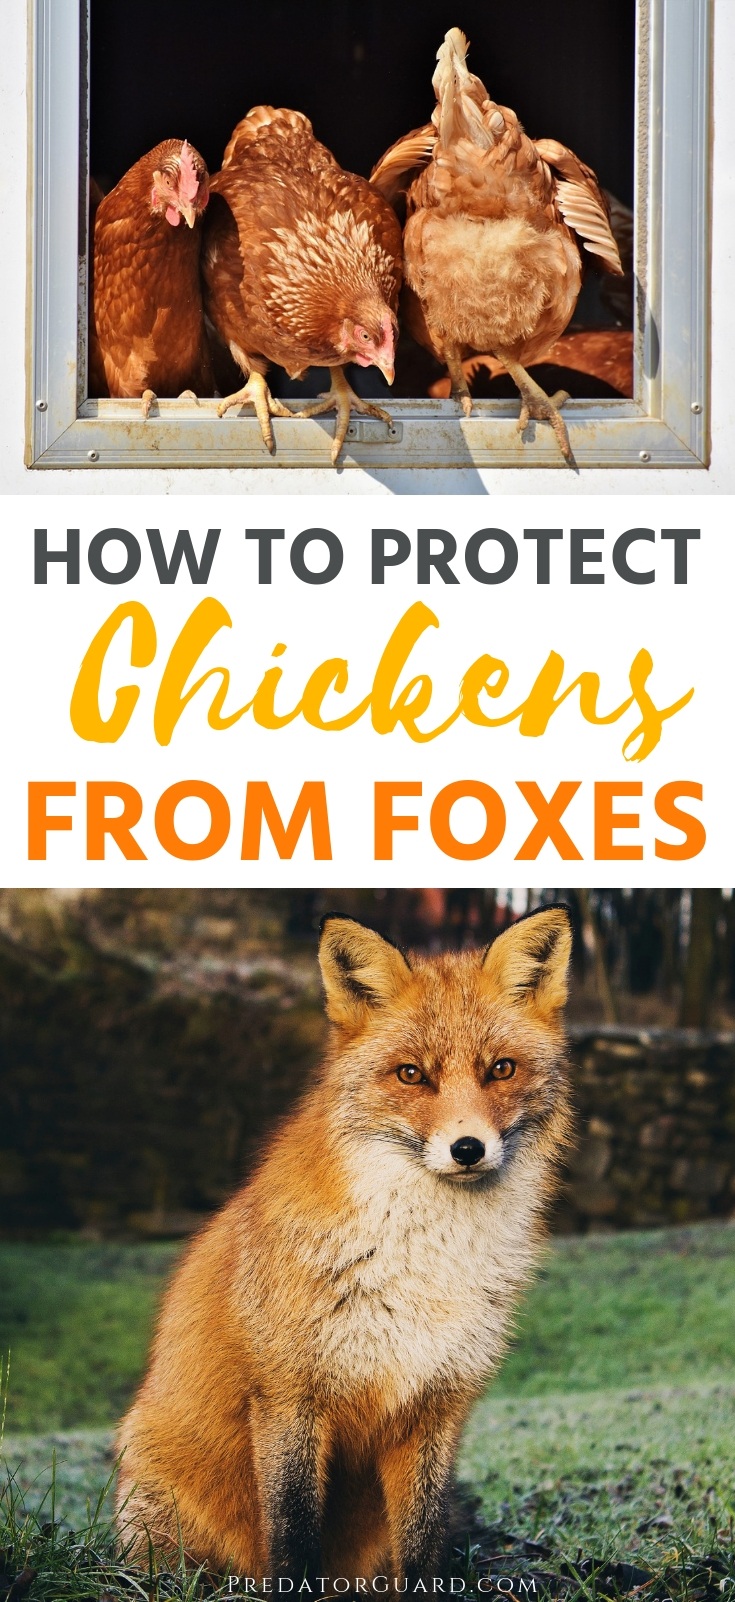 How-To-Protect-Chickens-From-Foxes-Predator-Guard